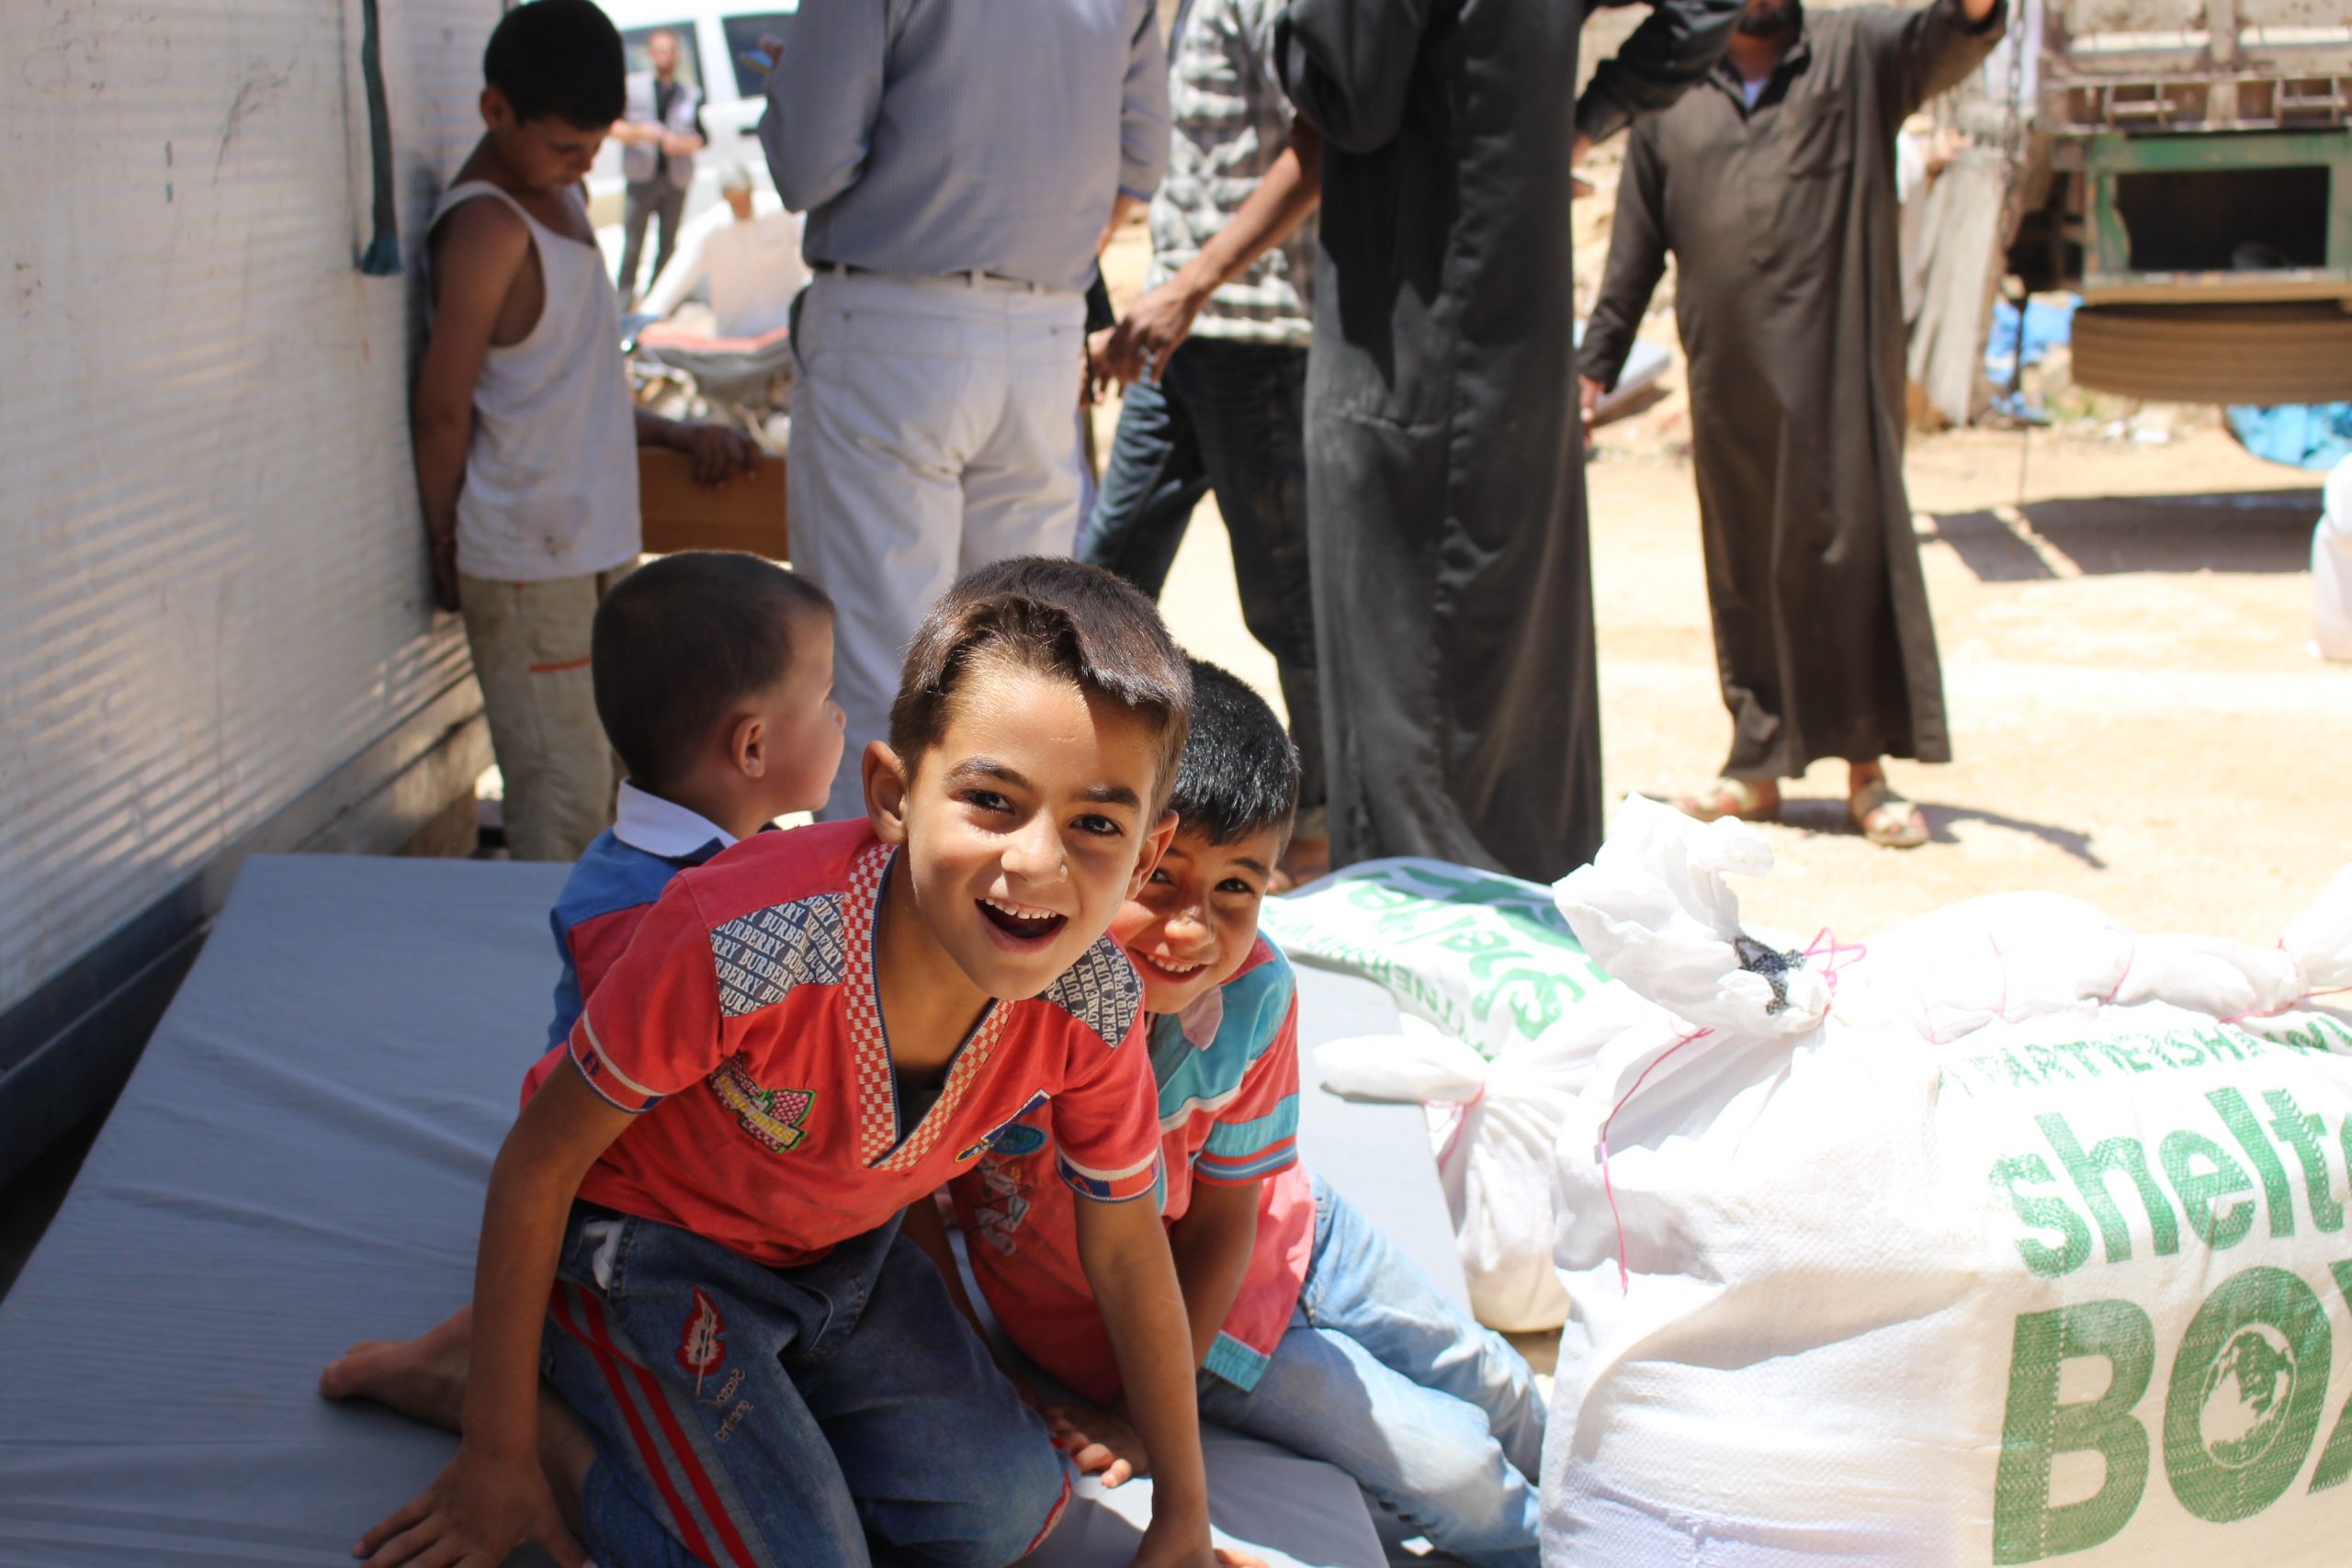 Children sitting on the floor smiling at the camera next to a bag of aid from ShelterBox and ReliefAid